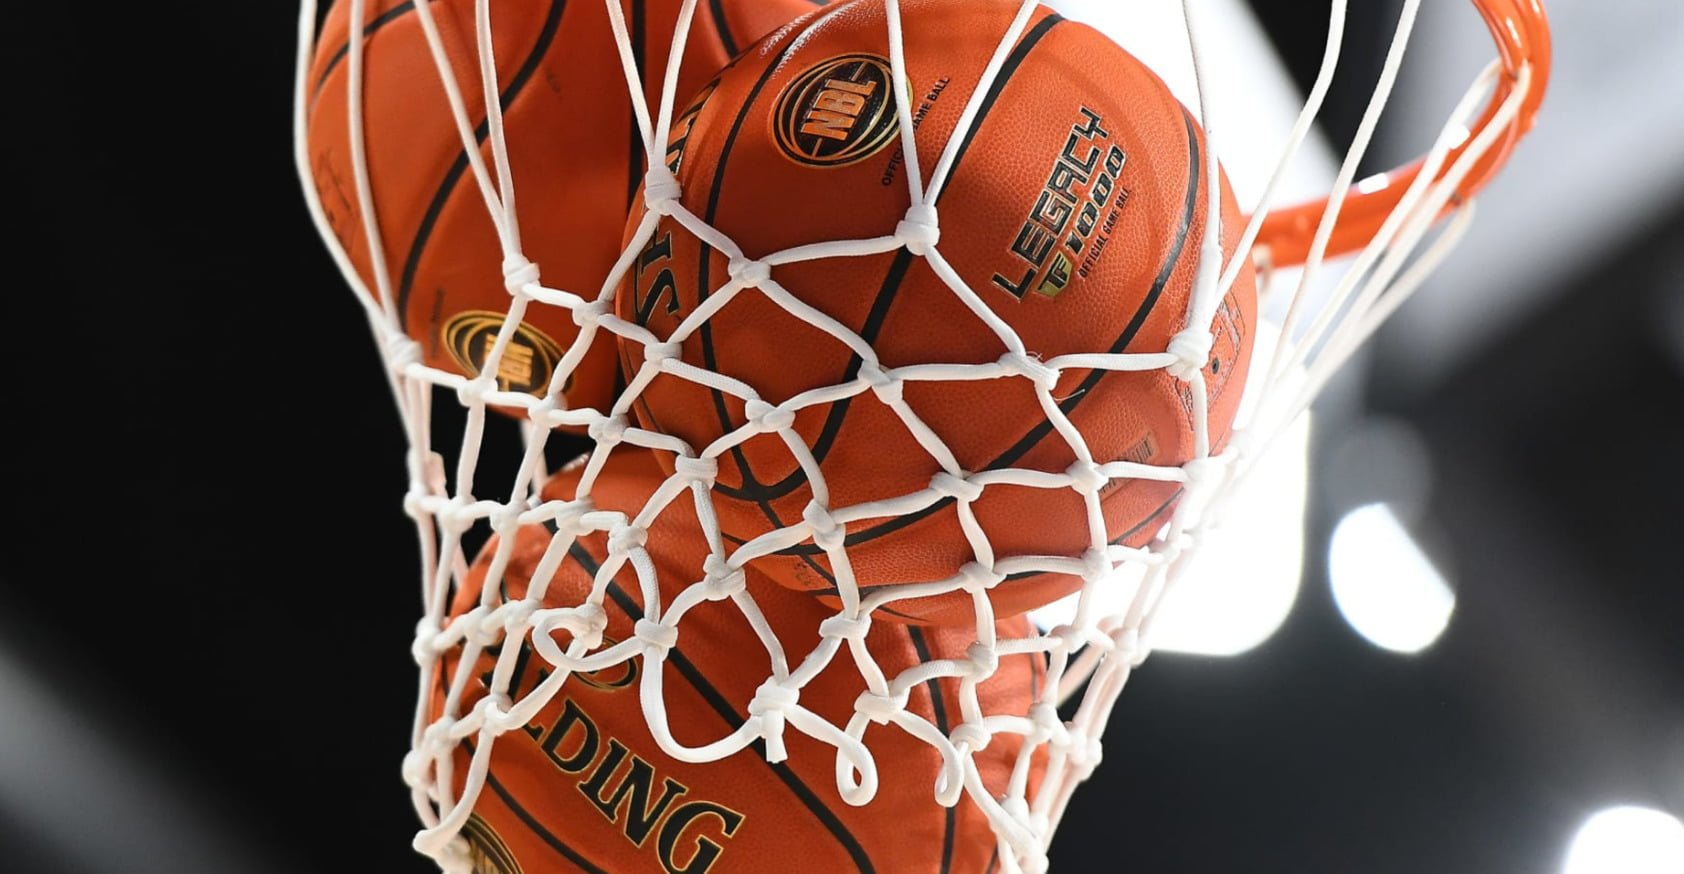 An Image showing a basketball net with three balls hanging within the net